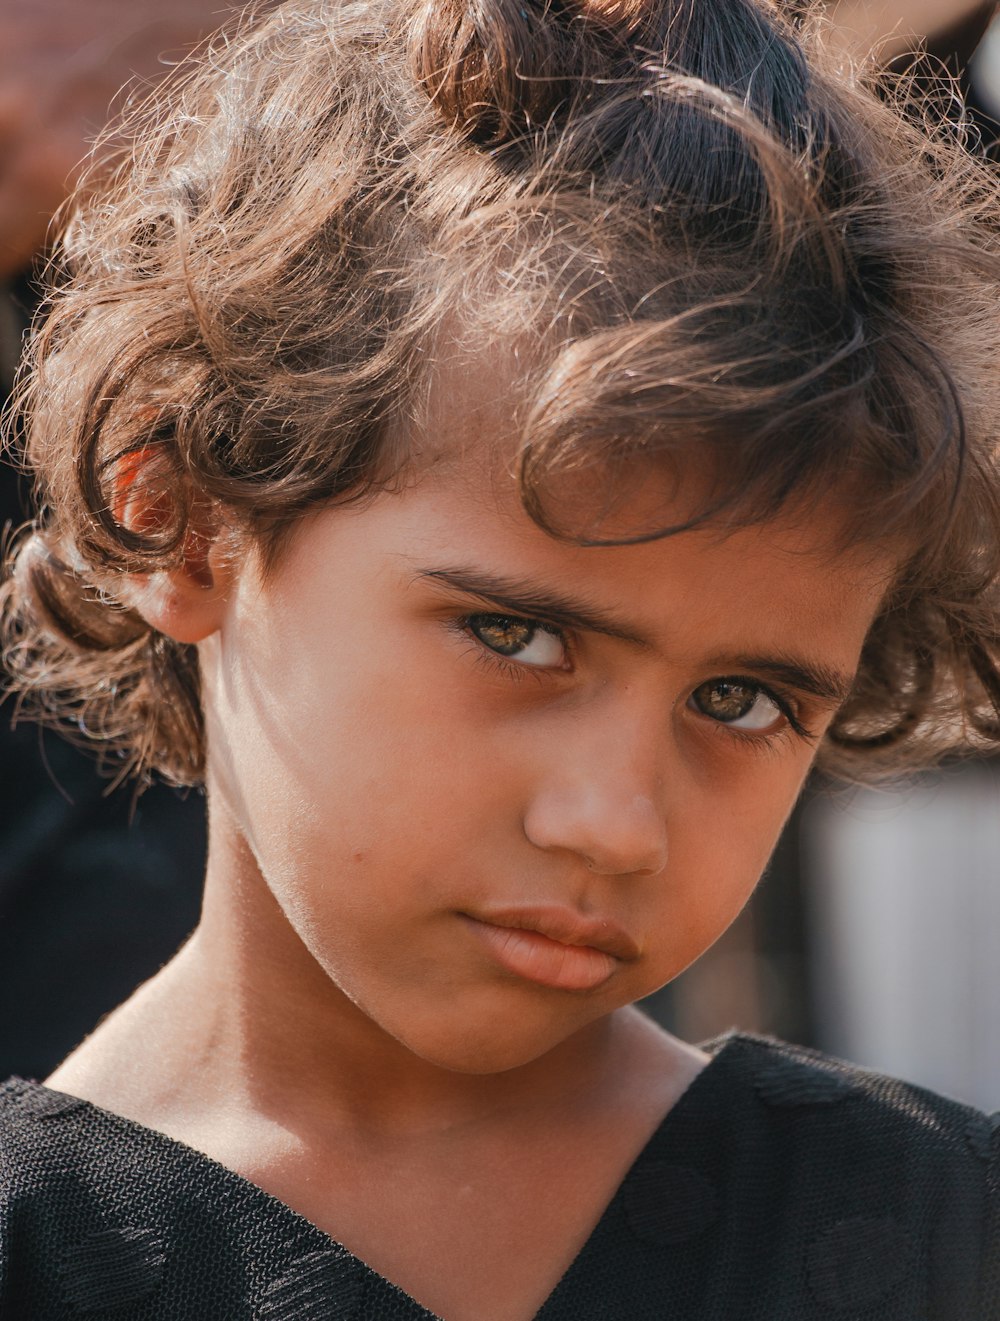 a close up of a young girl with a serious look on her face